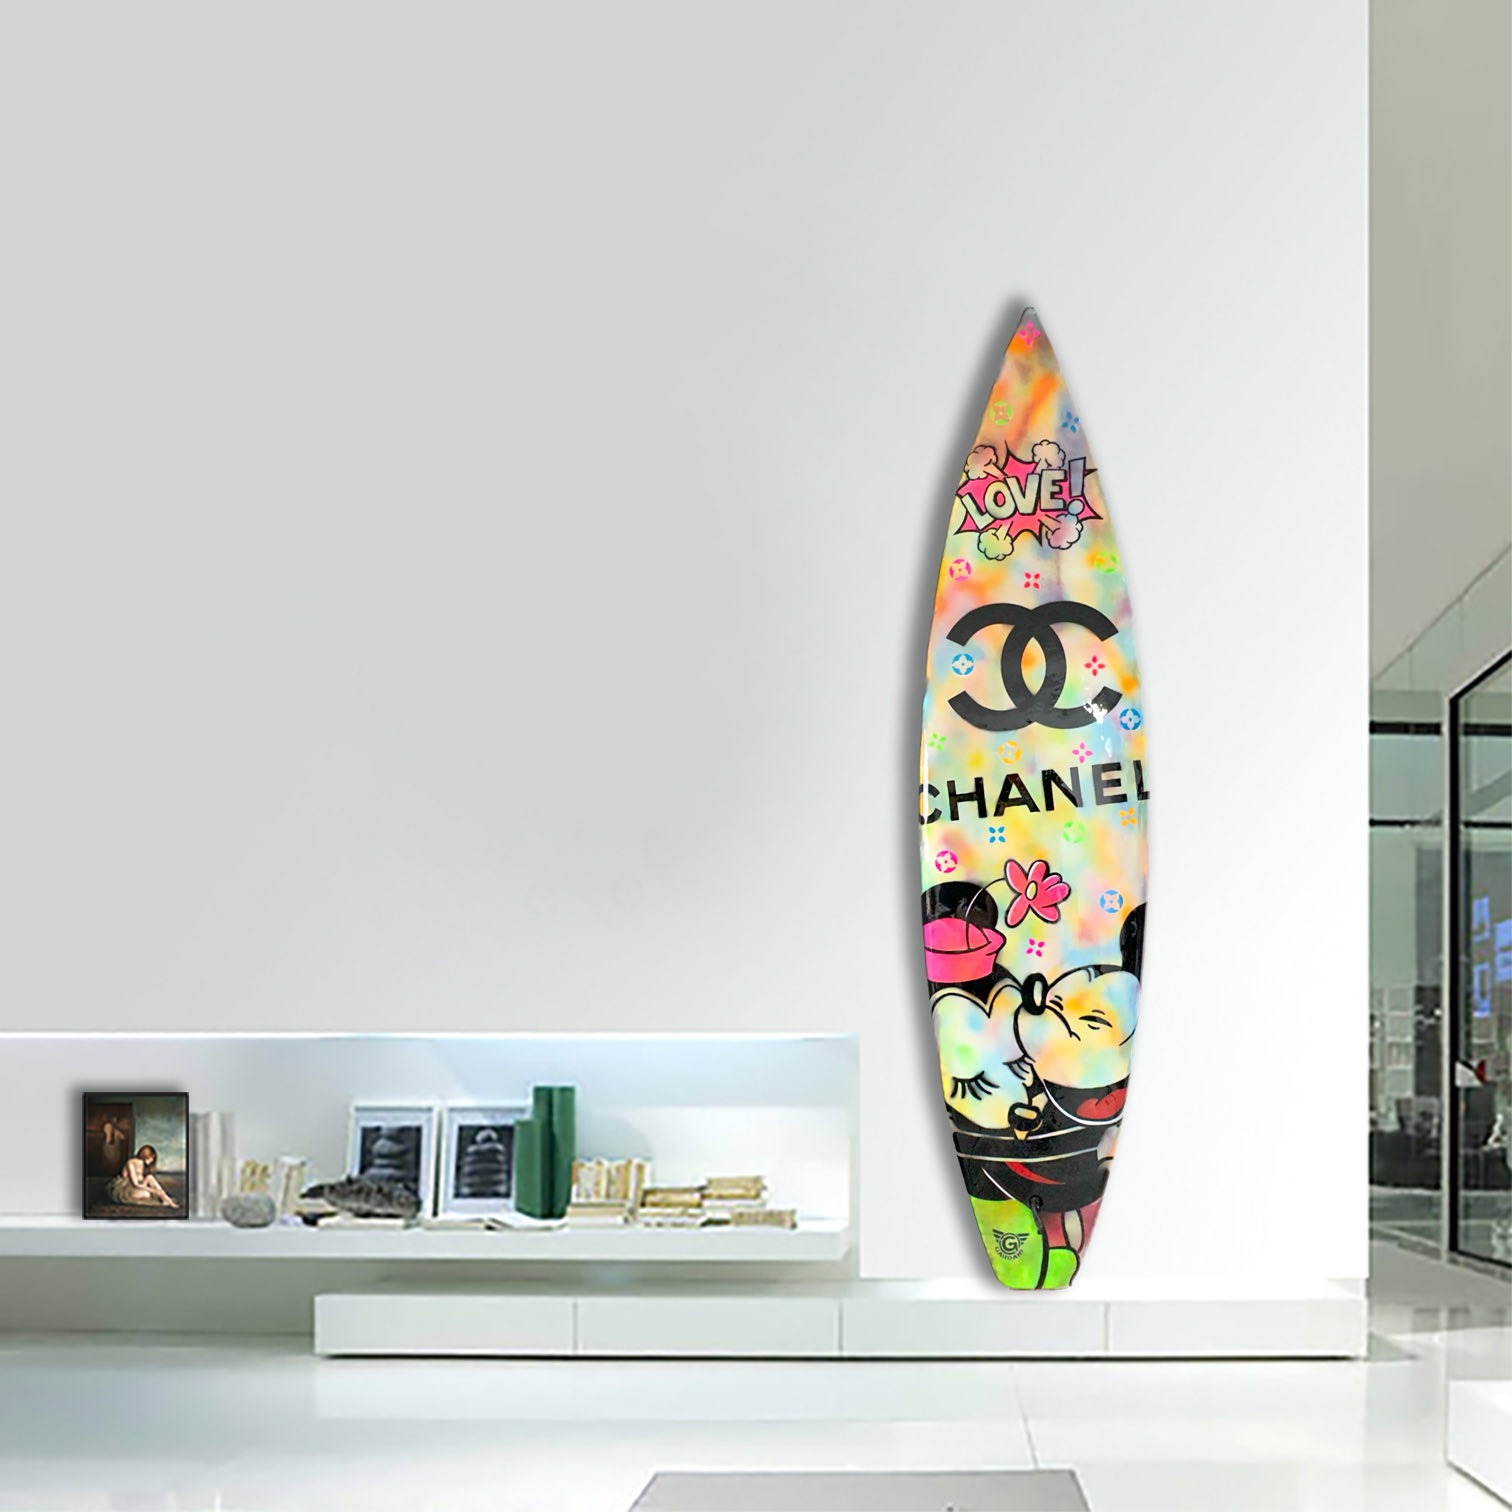 Summer's Most Amazing Surfboards